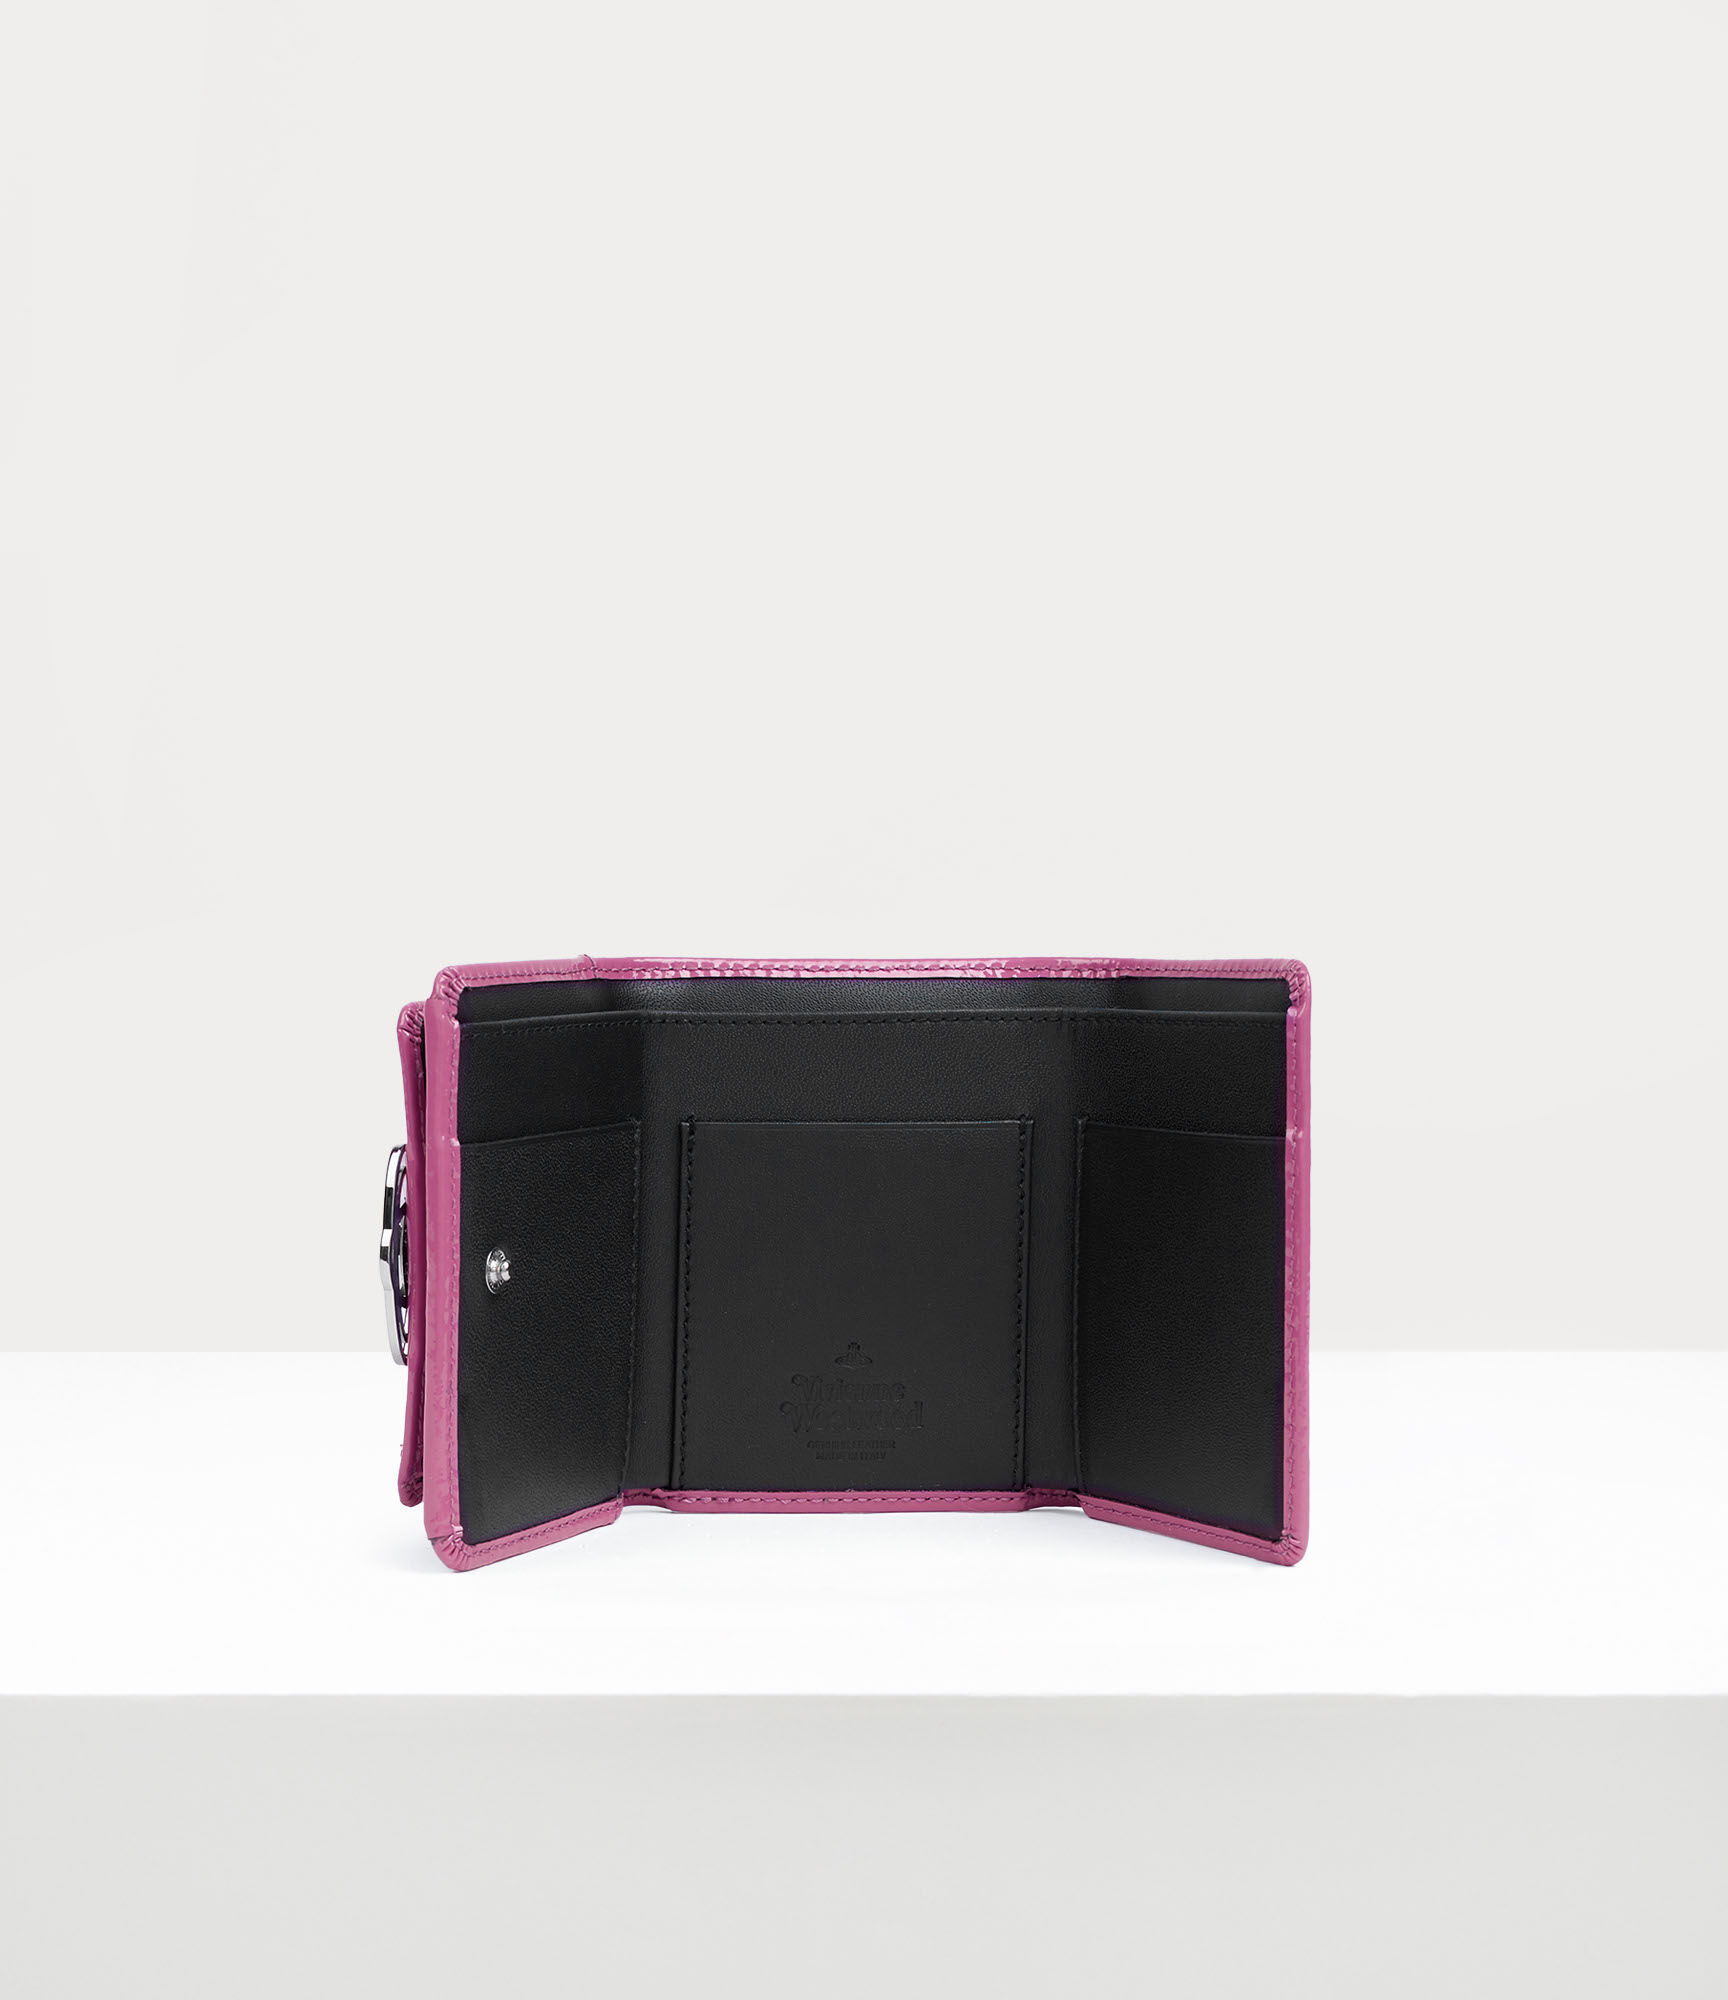 Shiny Patent Small Flap Purse in PINK | Vivienne Westwood®